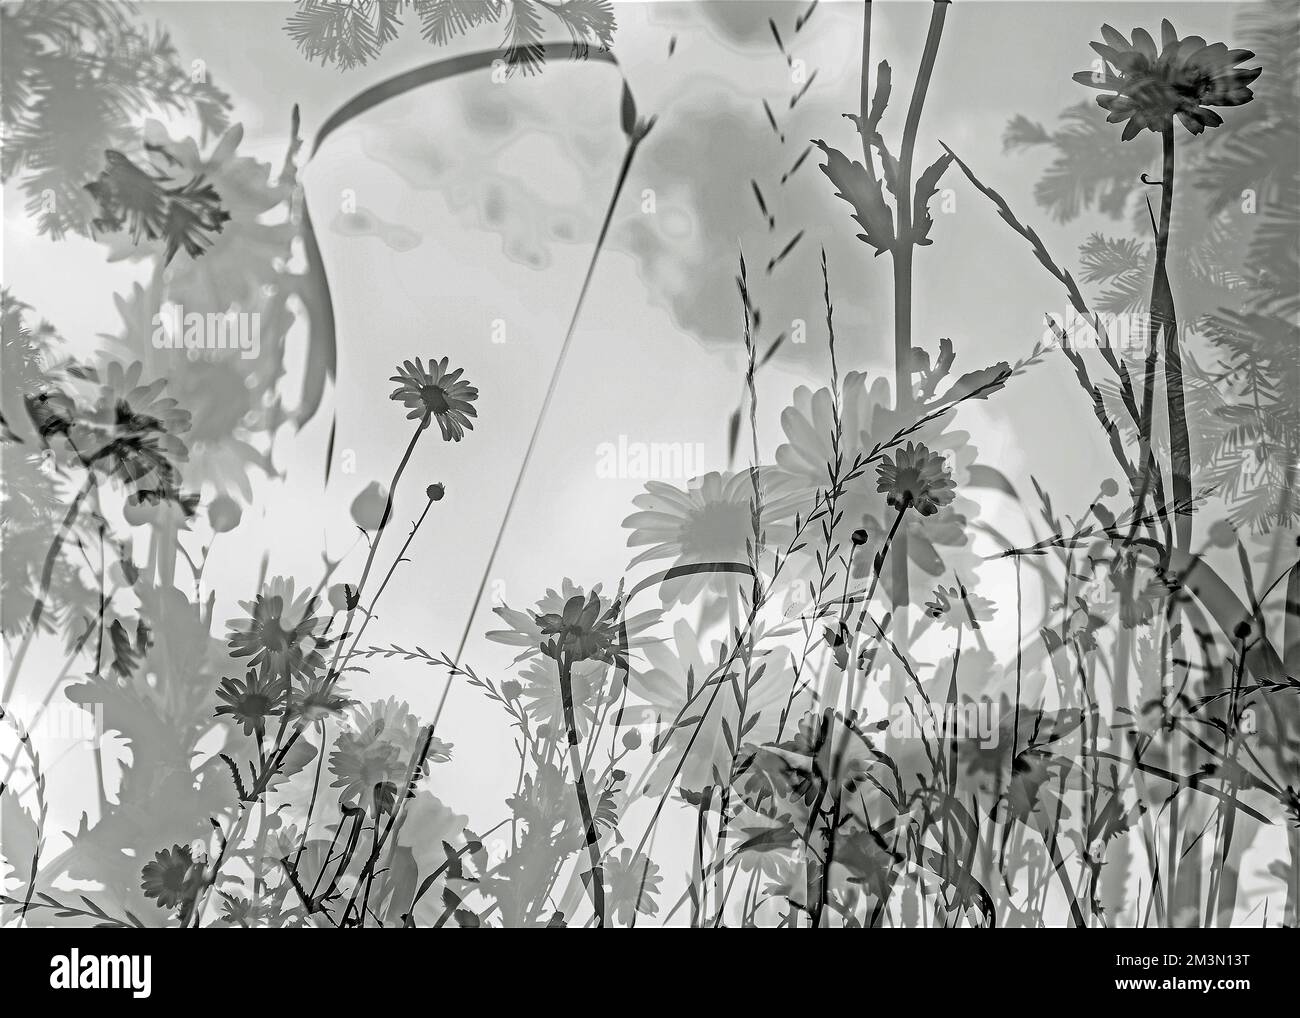 Fine art photograph semi abstract shot of wild flowers and plant life using in camera multiple exposures in black and white, an image of nature Stock Photo